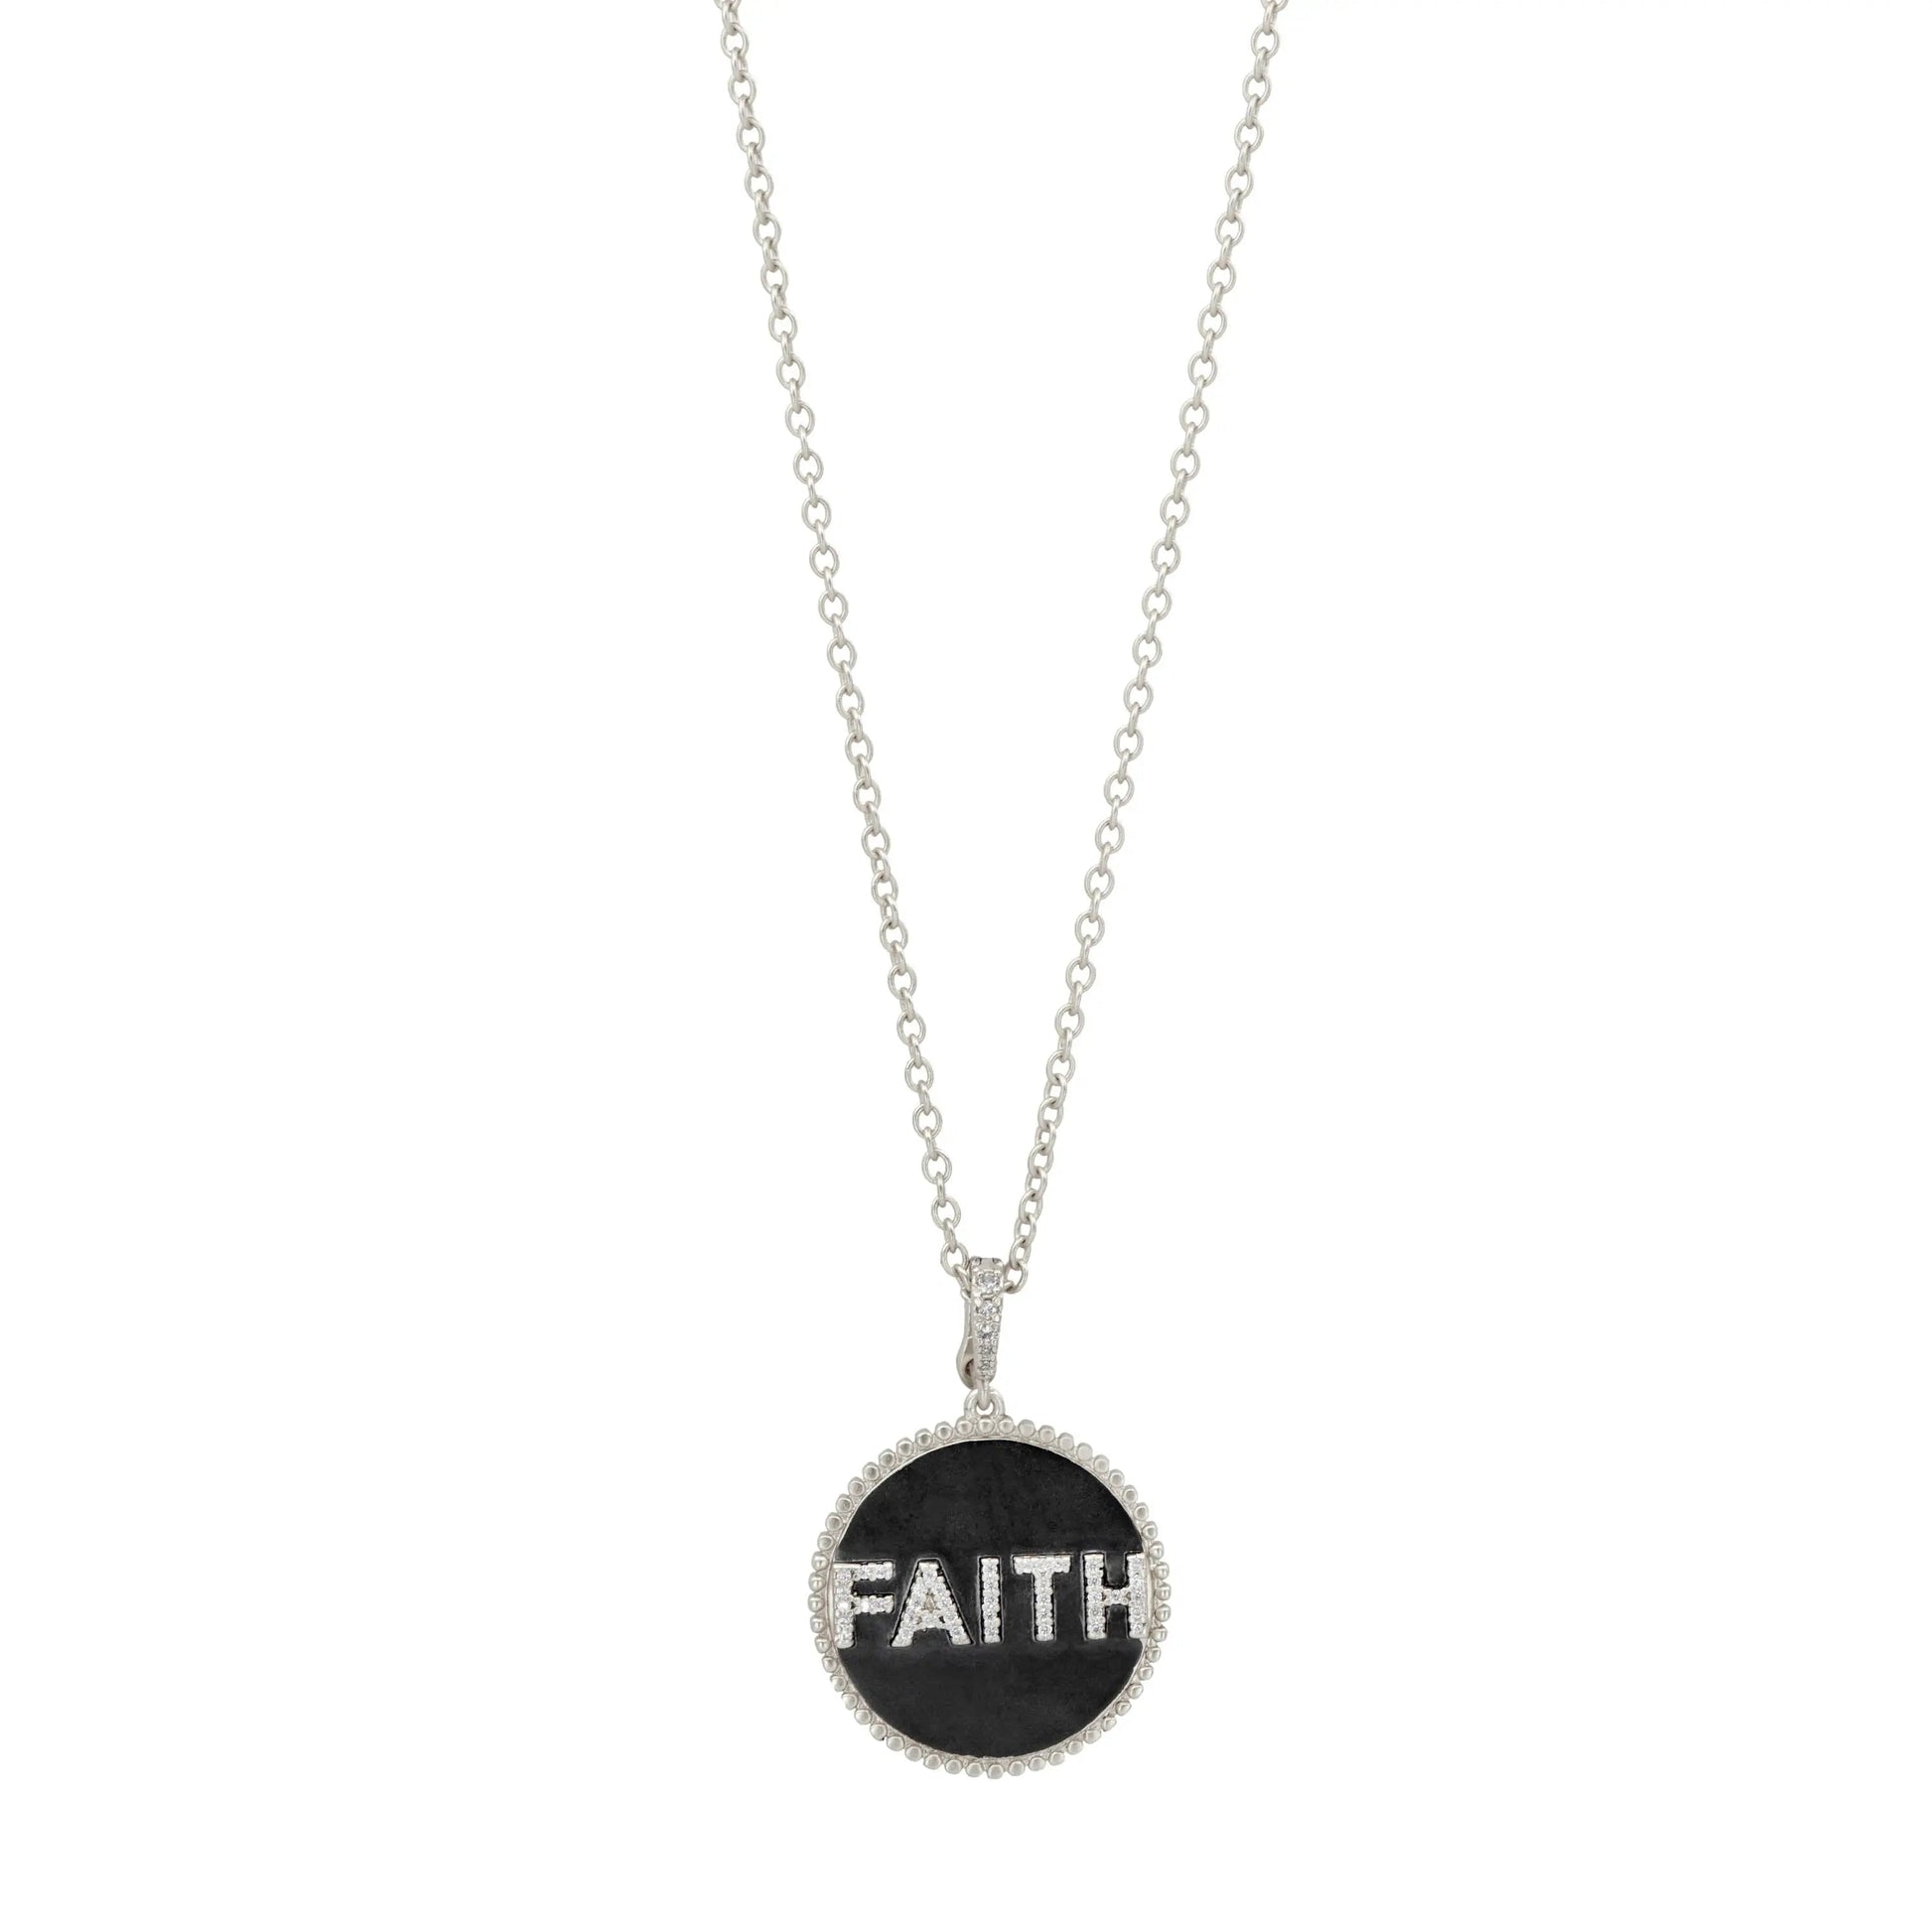 BlackSilver Double Sided FAITH Pendant Necklace Women of Strength NECKLACE